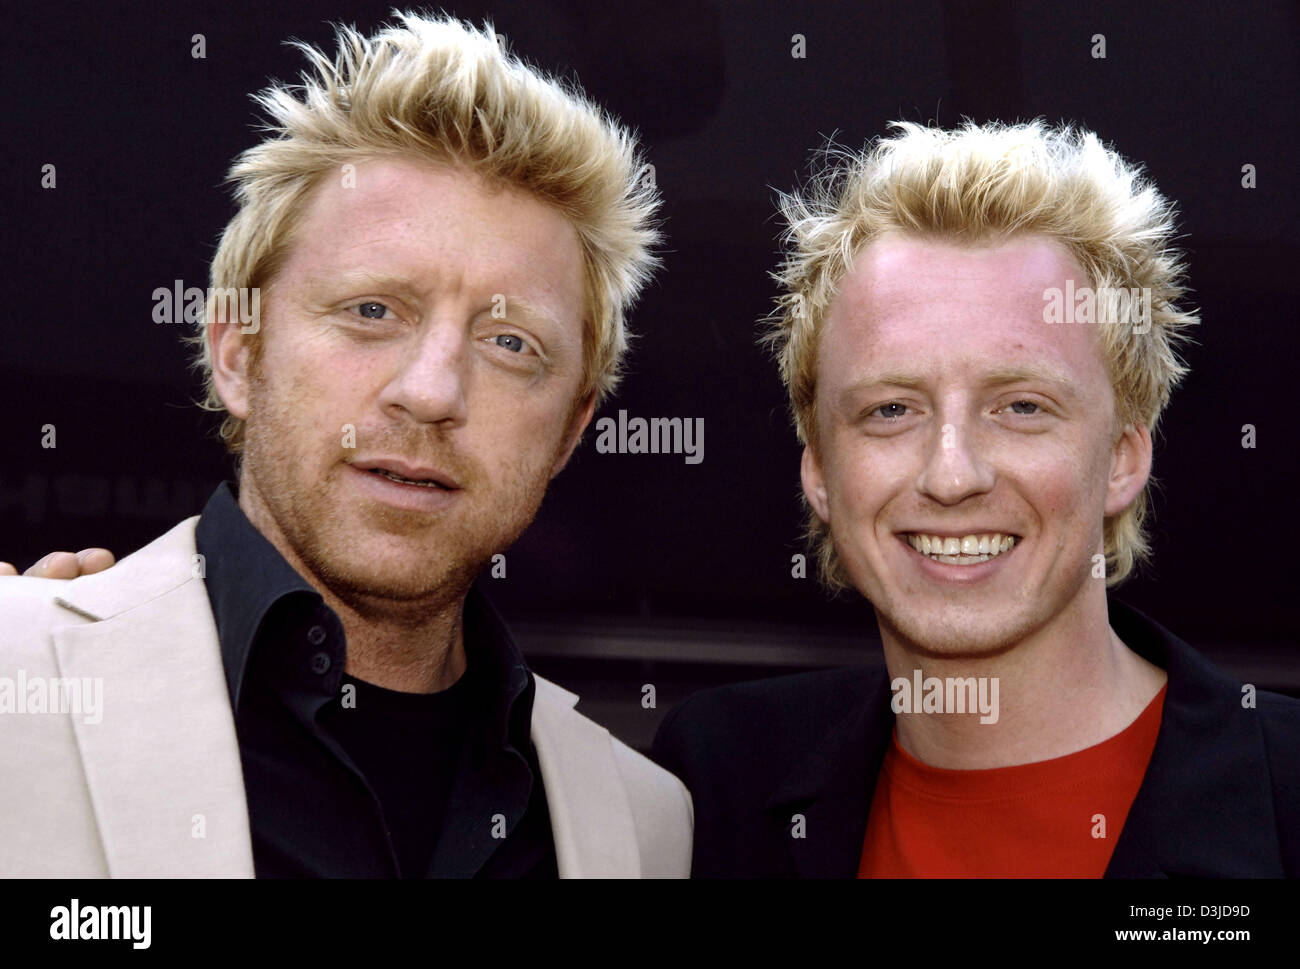 (dpa) - German tennis legend Boris Becker (L) and his look-alike Maik Lohmann smile at the ATP Tennis Masters in Hamburg, Germany, Friday 13 May 2005. Becker is the tournament's chairman. Lohmann plays Becker's look-alike in a German TV ad. Stock Photo